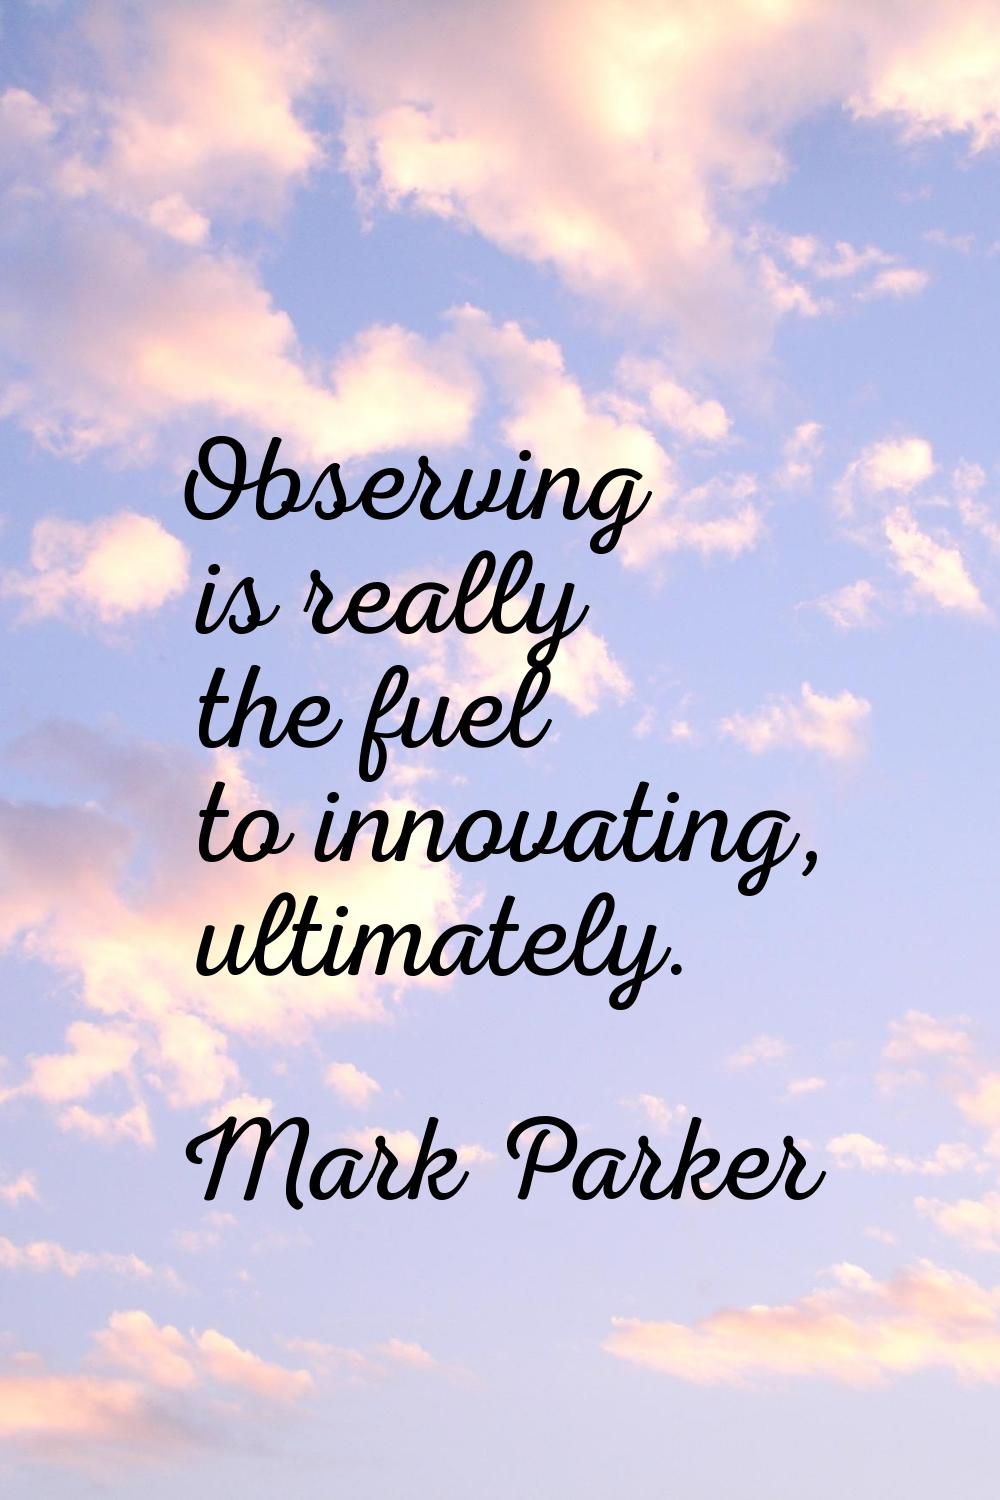 Observing is really the fuel to innovating, ultimately.